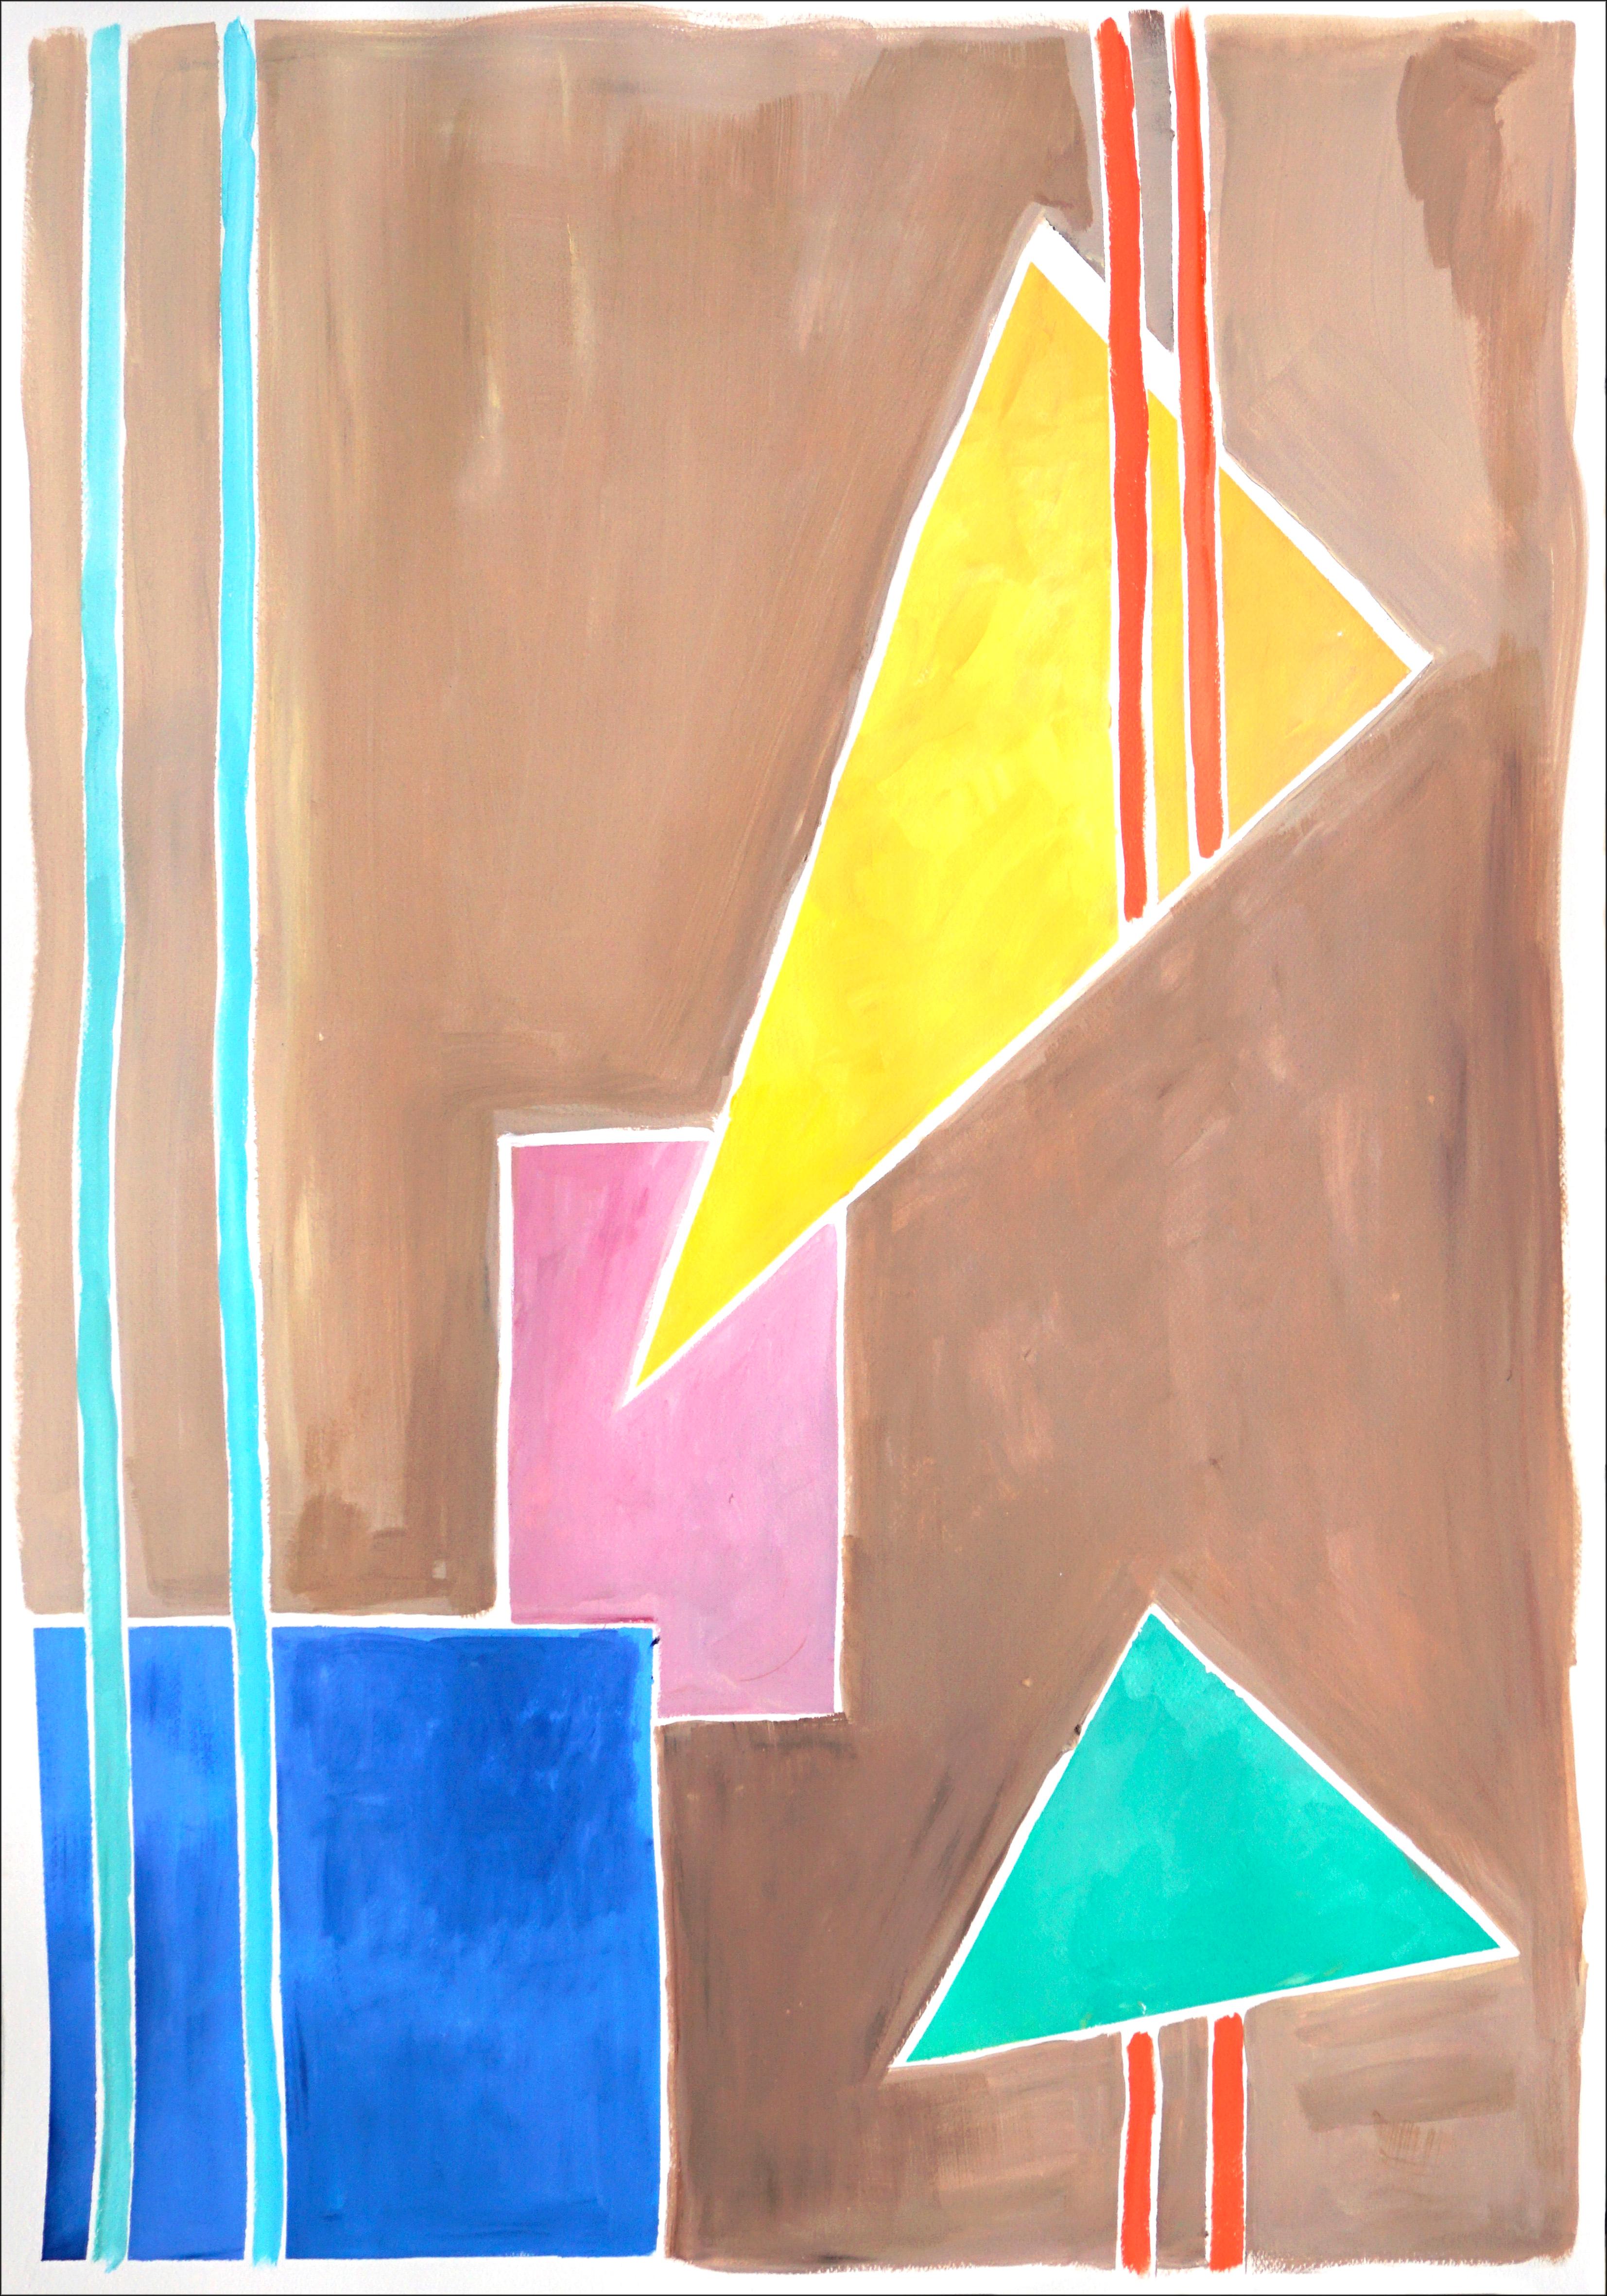 Natalia Roman Still-Life Painting - Balanced Geometry I, Primary Pastel Tones, Shapes and Lines on Tan Background